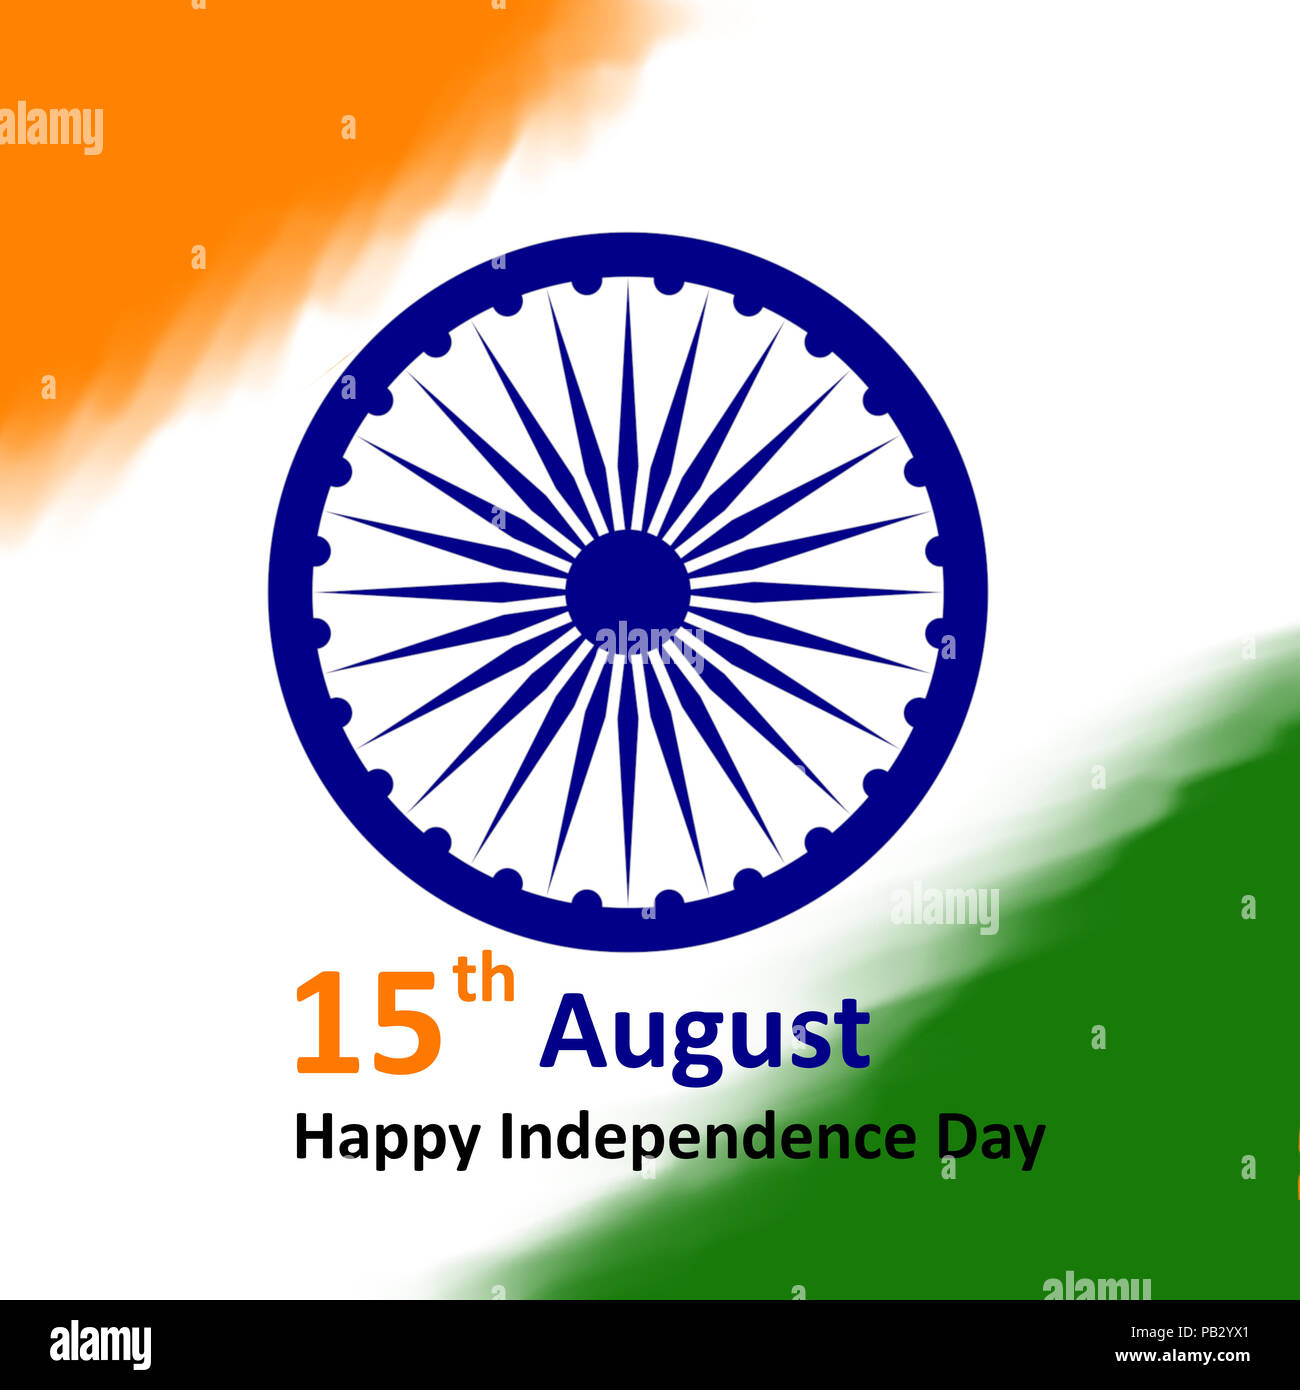 Happy independence day of india Stock Photo